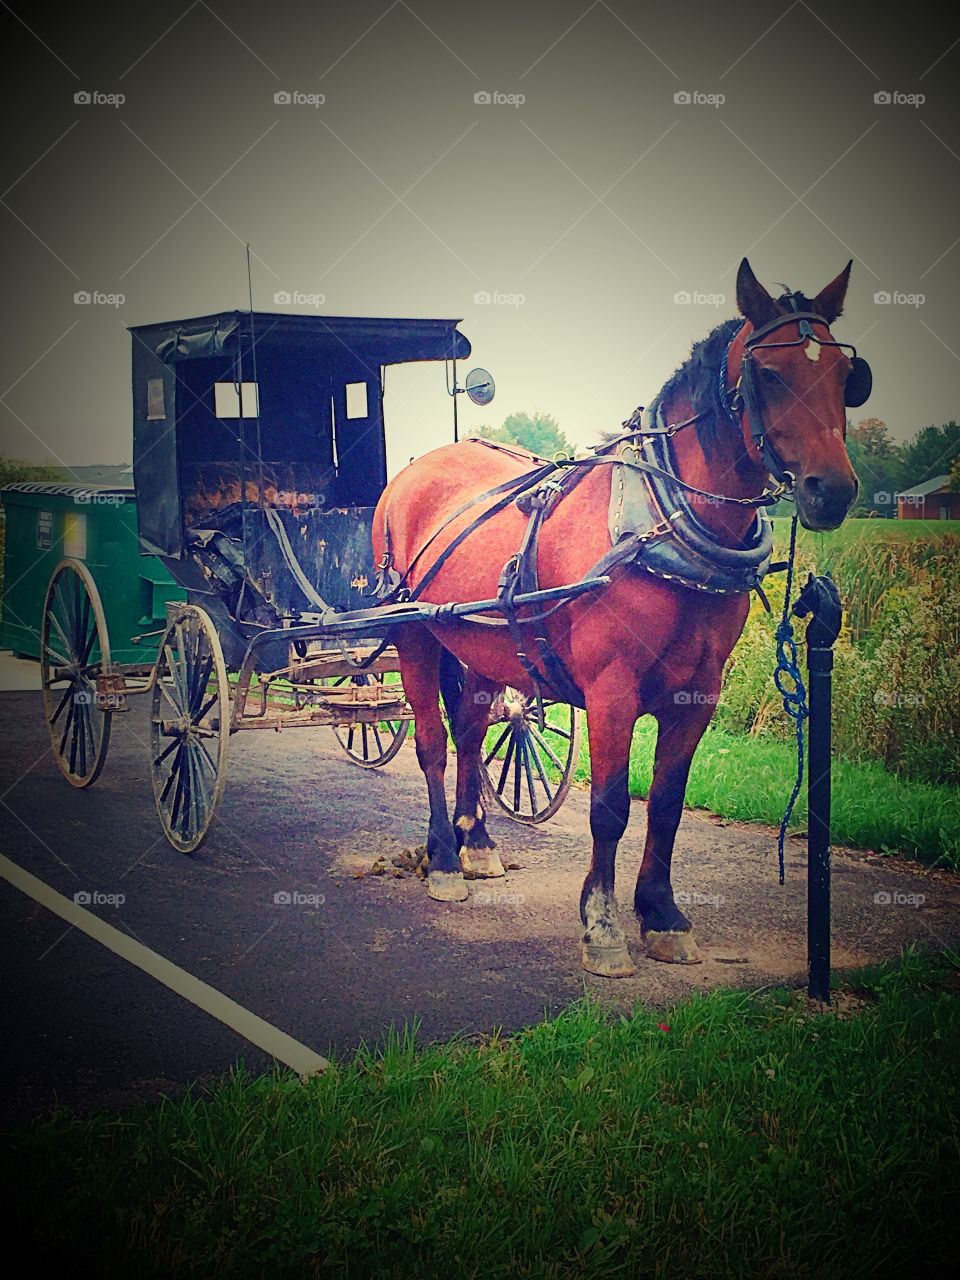 Amish Horse & Buggy. A horse-drawn carriage used by an Amish family. 